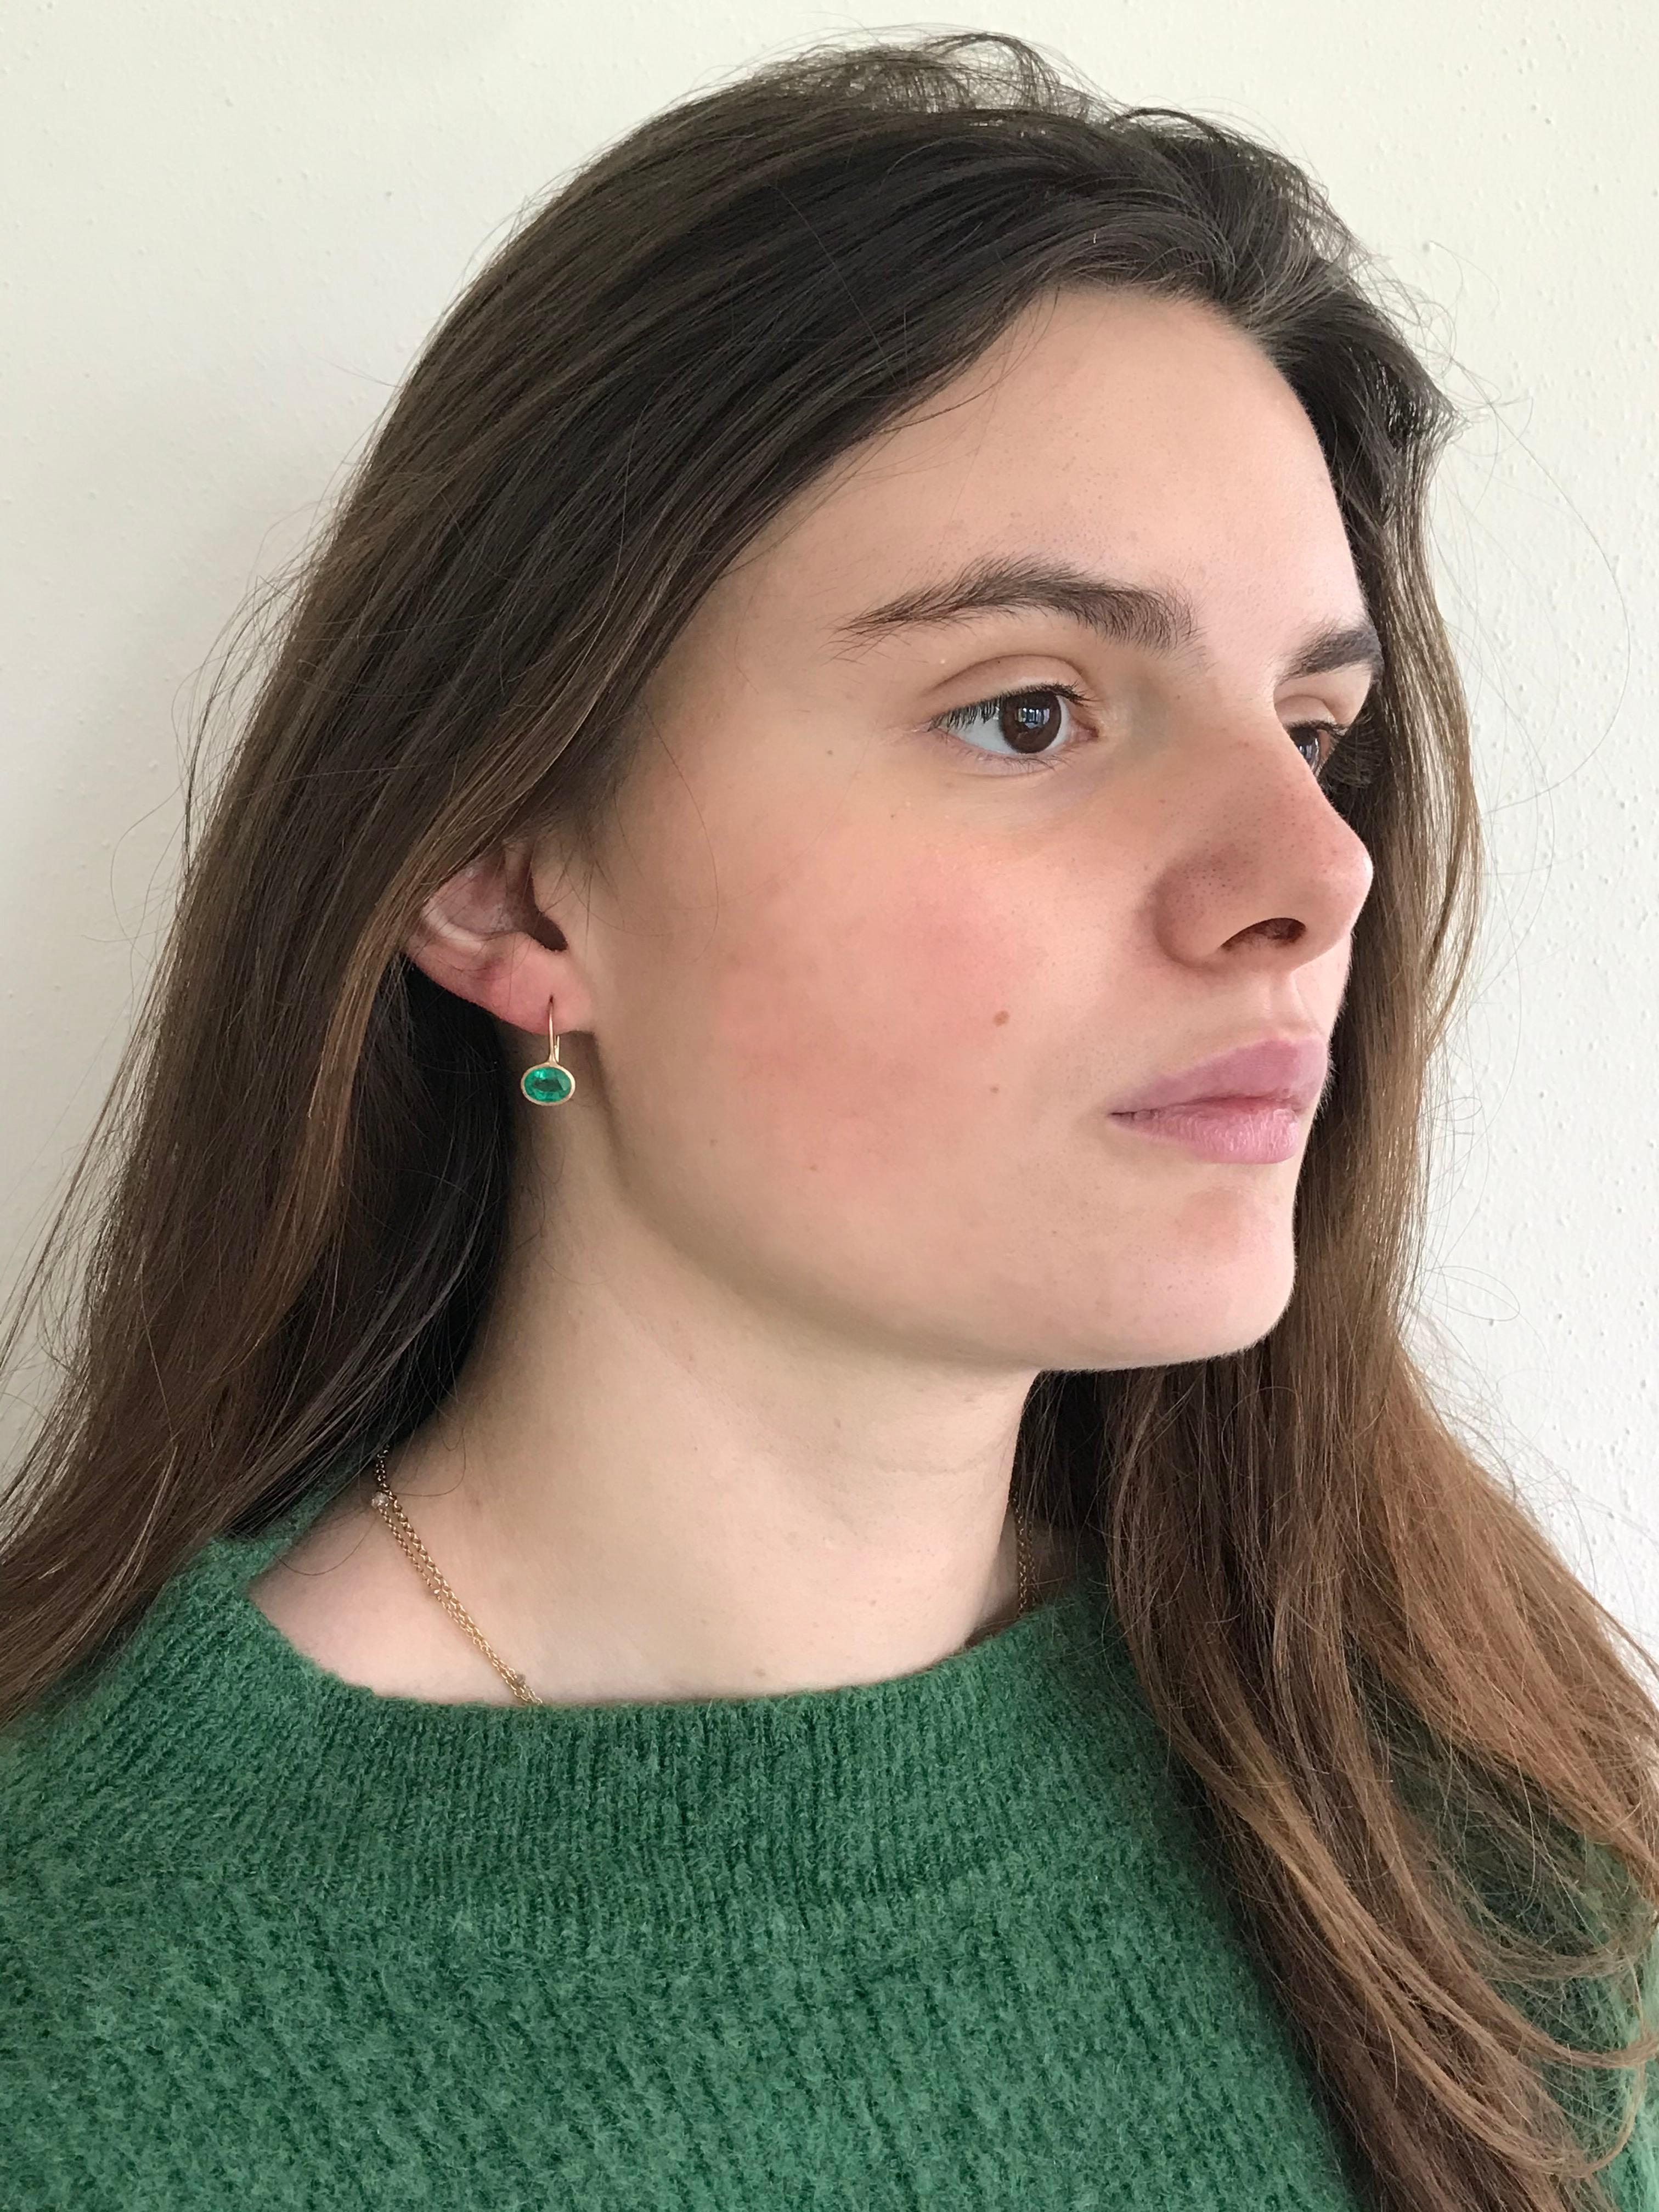 Dalben design  18k rose gold matte finishing earrings with two bezel-set oval faceted cut  small emerald weight 2,63 carats . 
Bezel stone dimensions :
 width 9  mm
height without leverback 7,6  mm
height with leverback 17,3 mm
The earrings has been